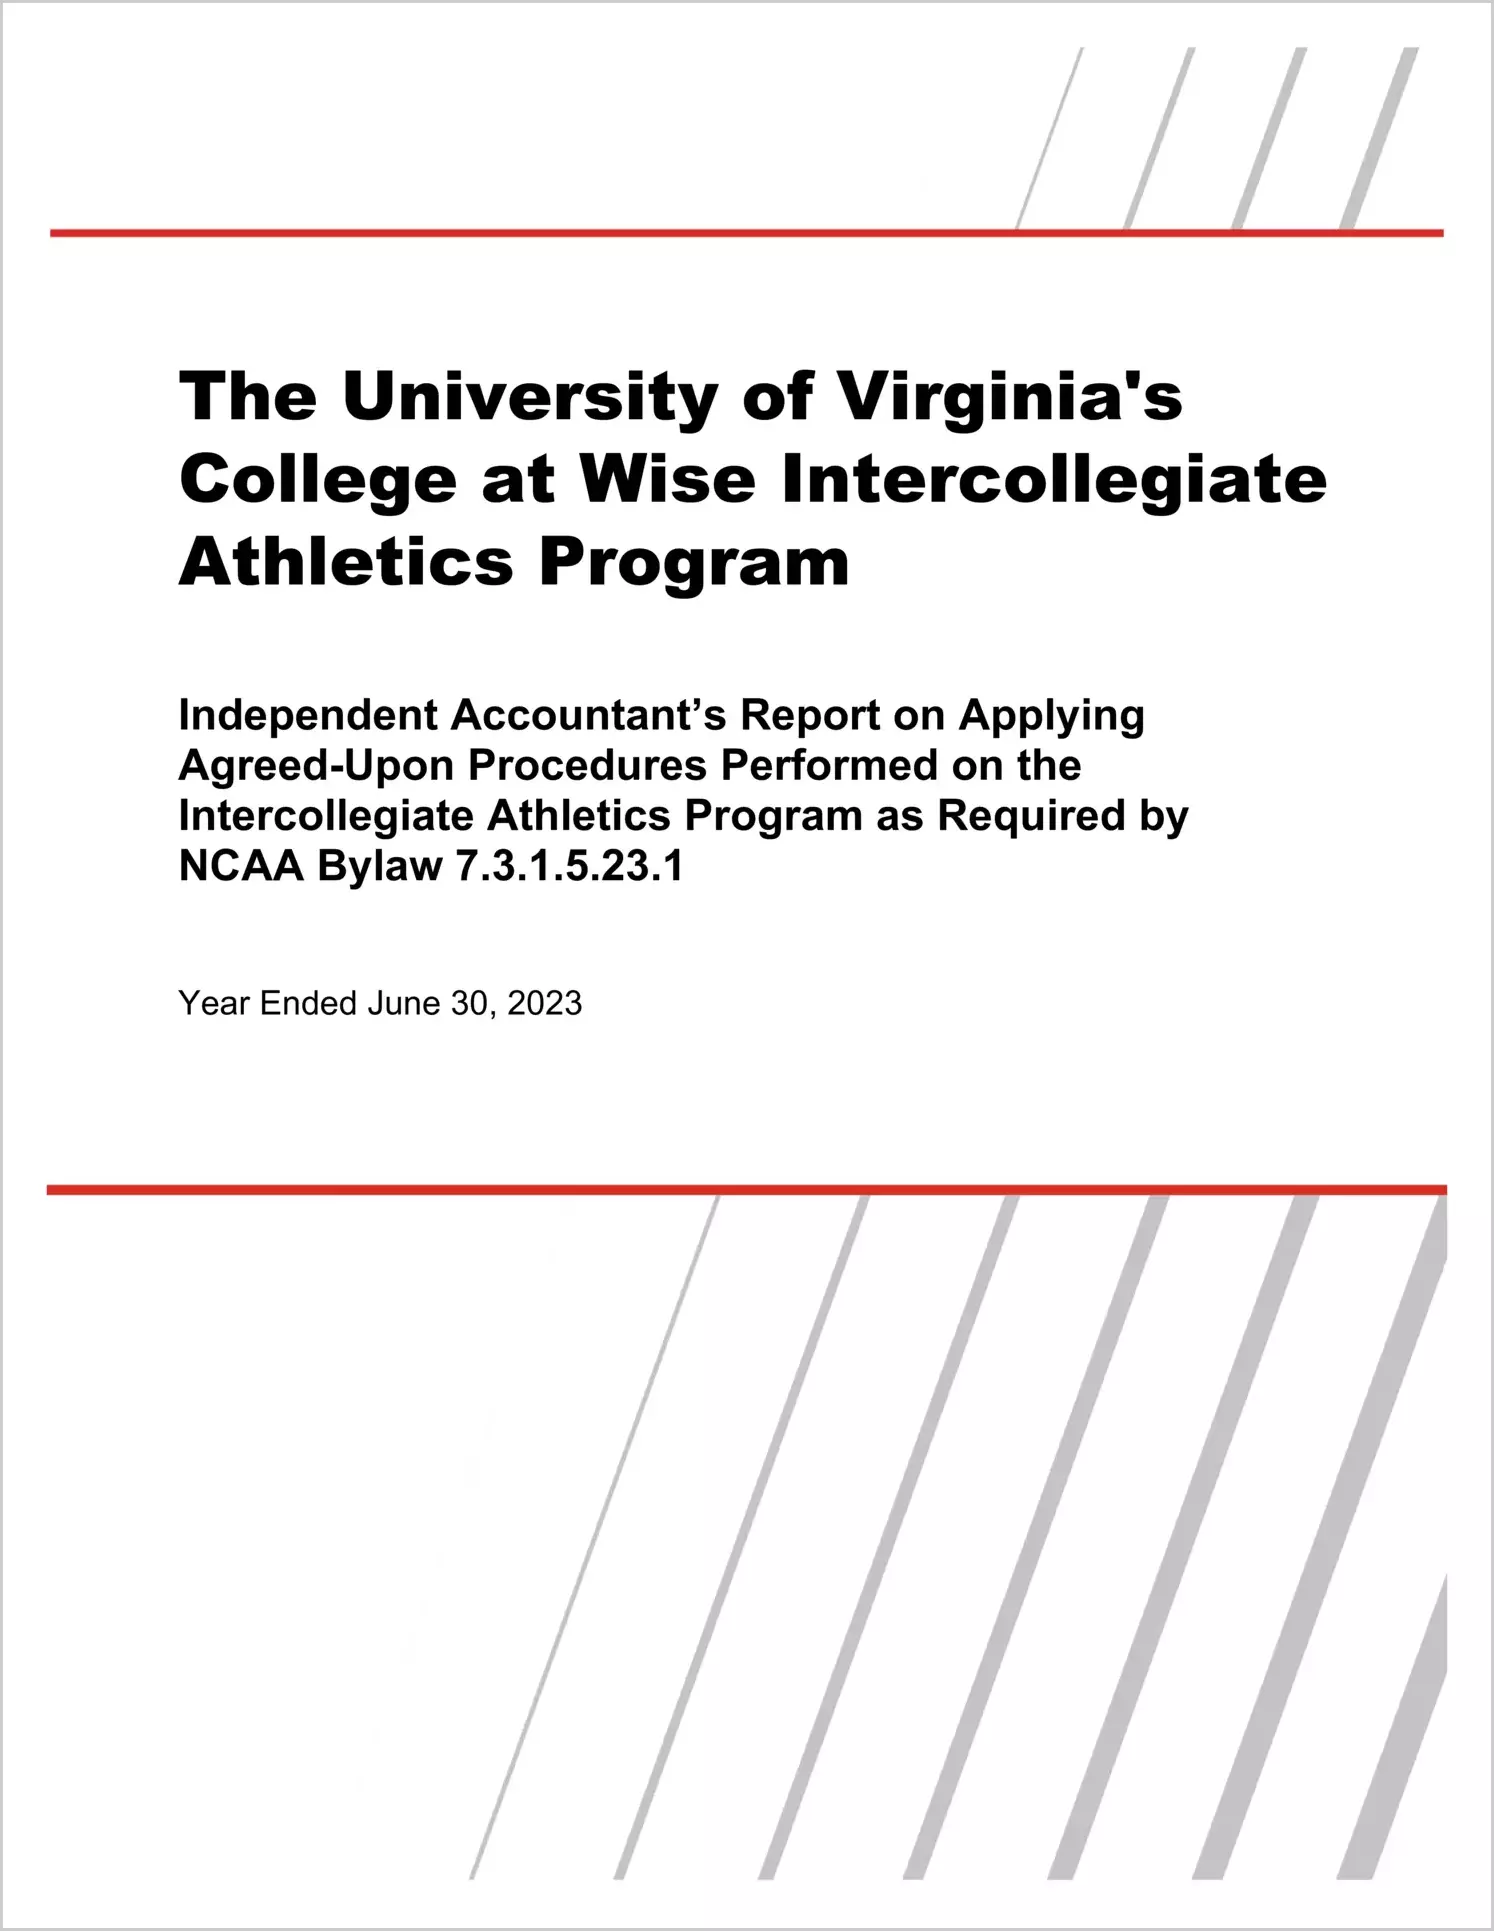 The University of Virginia's College at Wise Intercollegiate Athletics Program for the year ended June 30, 2023